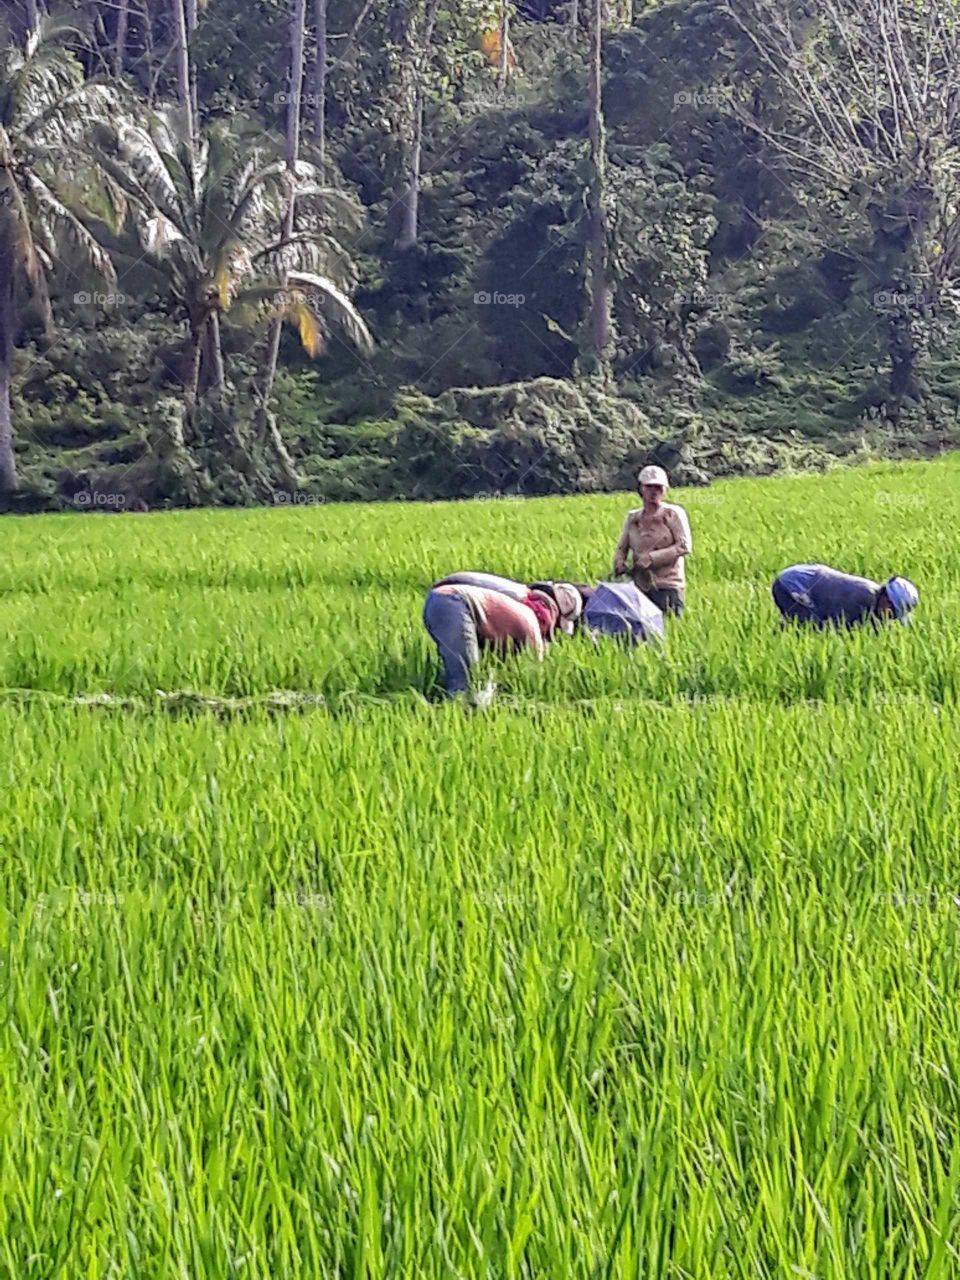 These are ladies weeding, working in my ricefield on a hot, sunny day.